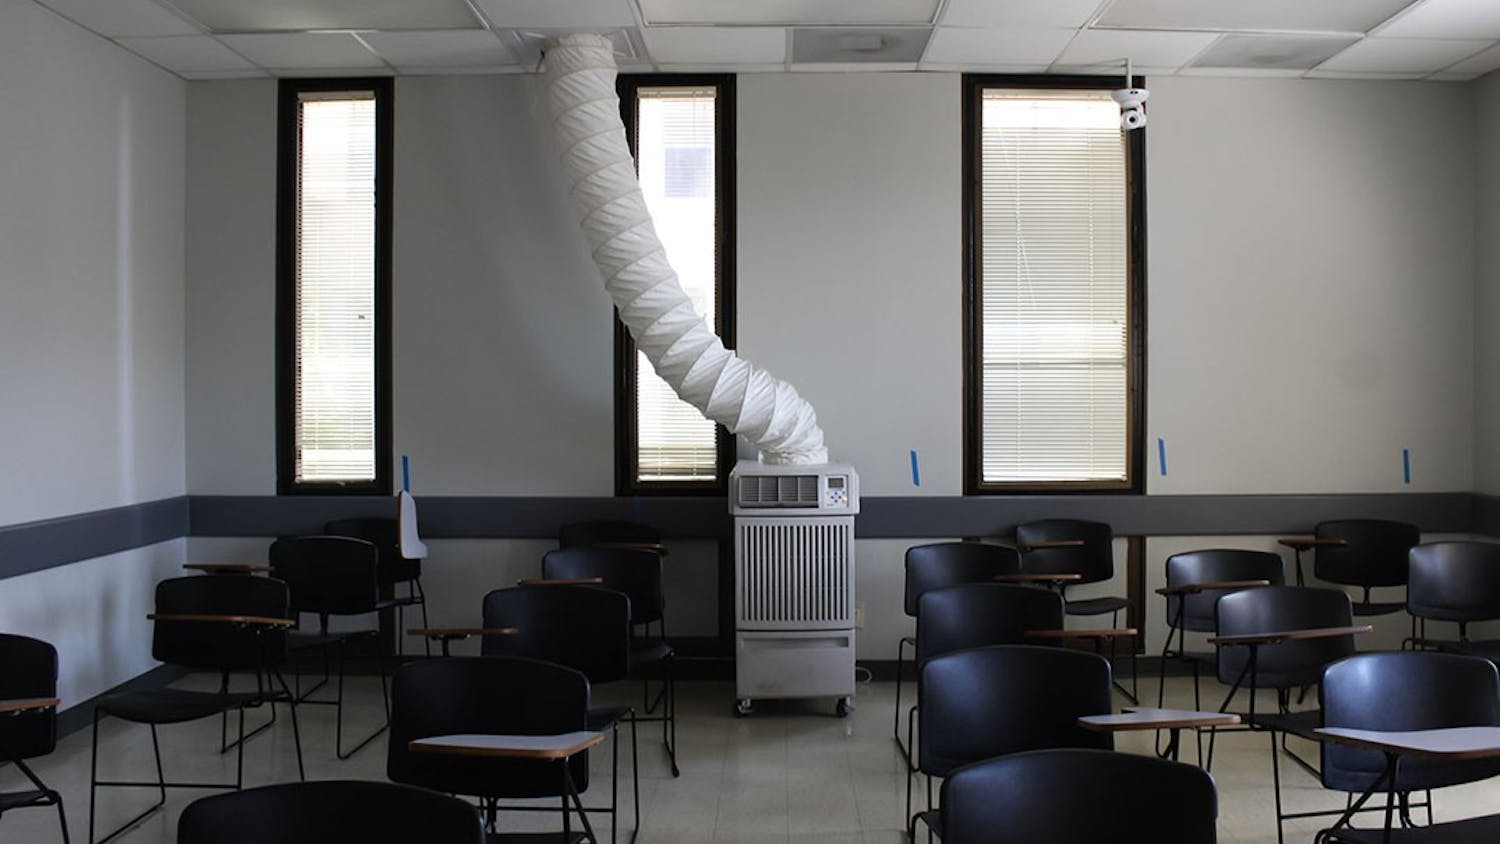 A picture of a portable HVAC unit in the Humanities Classroom Building. The failing air conditioning system will be replaced but is a current threat to the electrical systems, has caused discomfort for students, faculty and staff and could promote the spread of COVID-19.